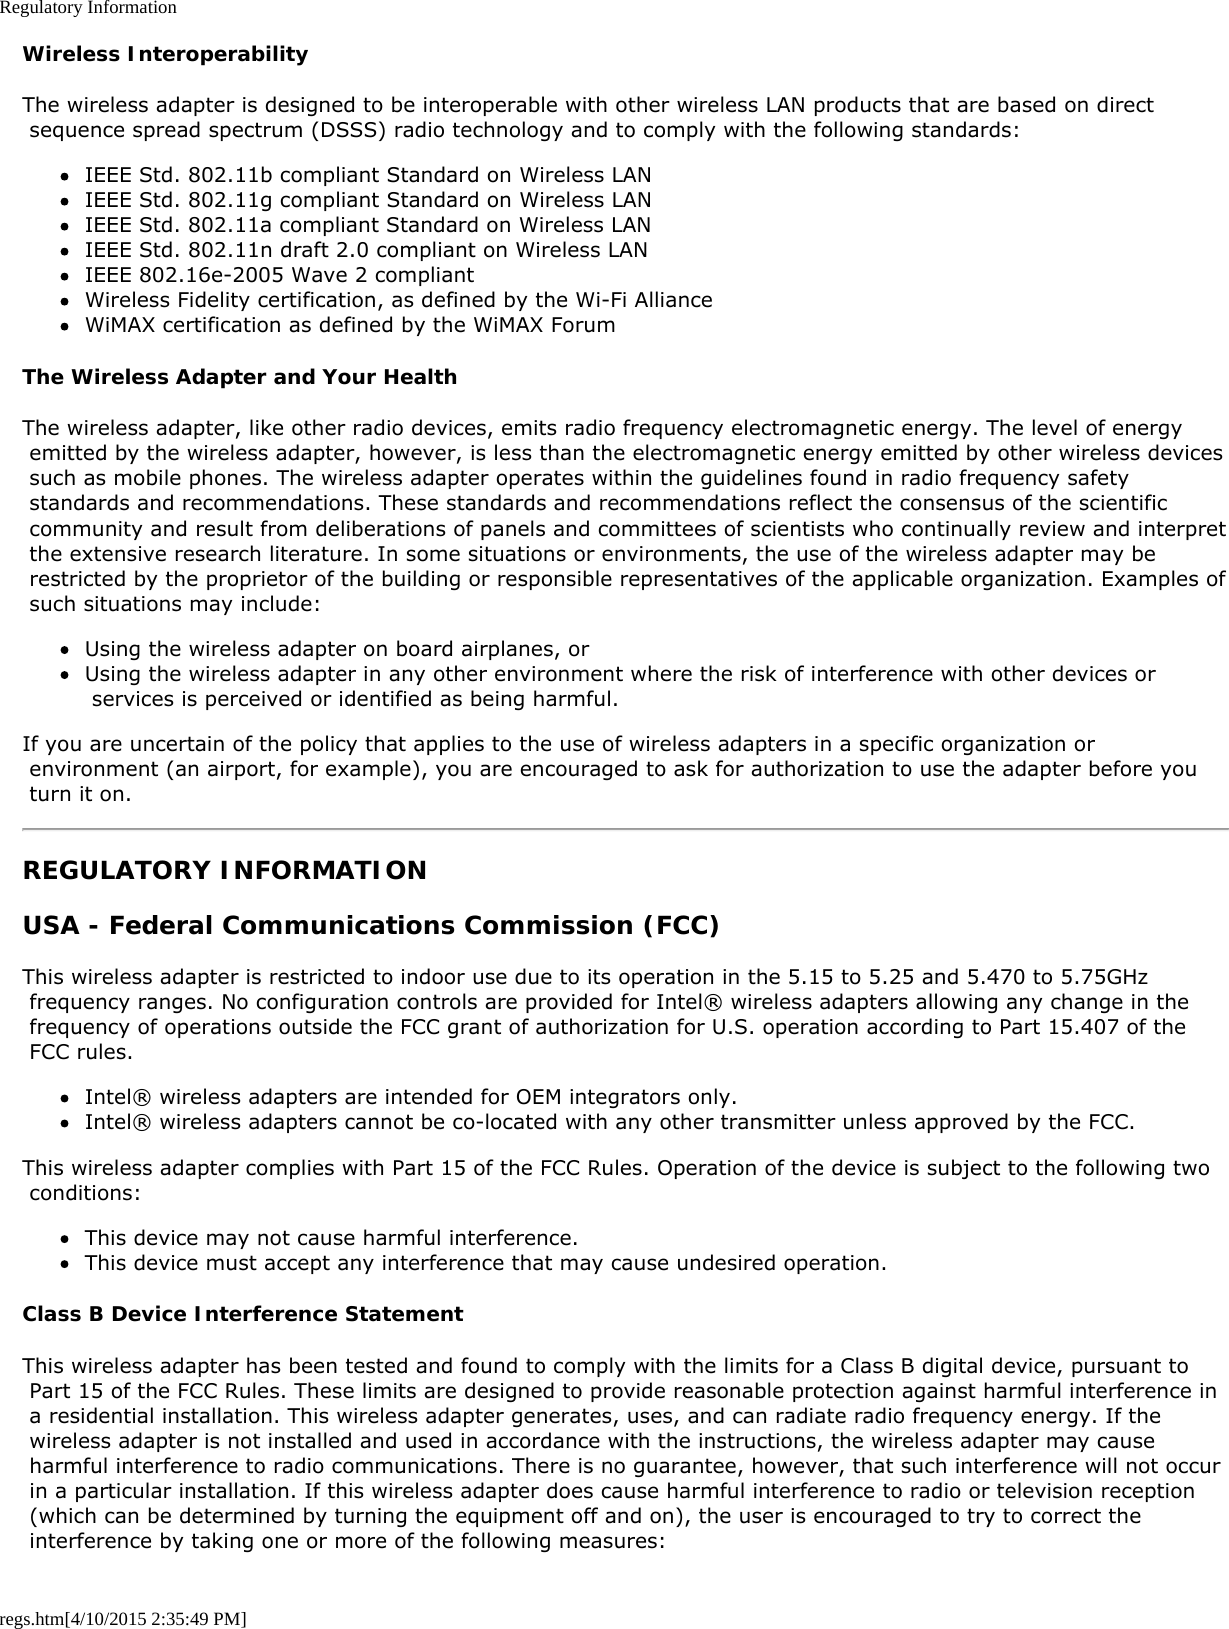 Regulatory Informationregs.htm[4/10/2015 2:35:49 PM]Wireless InteroperabilityThe wireless adapter is designed to be interoperable with other wireless LAN products that are based on direct sequence spread spectrum (DSSS) radio technology and to comply with the following standards:IEEE Std. 802.11b compliant Standard on Wireless LANIEEE Std. 802.11g compliant Standard on Wireless LANIEEE Std. 802.11a compliant Standard on Wireless LANIEEE Std. 802.11n draft 2.0 compliant on Wireless LANIEEE 802.16e-2005 Wave 2 compliantWireless Fidelity certification, as defined by the Wi-Fi AllianceWiMAX certification as defined by the WiMAX ForumThe Wireless Adapter and Your HealthThe wireless adapter, like other radio devices, emits radio frequency electromagnetic energy. The level of energy emitted by the wireless adapter, however, is less than the electromagnetic energy emitted by other wireless devices such as mobile phones. The wireless adapter operates within the guidelines found in radio frequency safety standards and recommendations. These standards and recommendations reflect the consensus of the scientific community and result from deliberations of panels and committees of scientists who continually review and interpret the extensive research literature. In some situations or environments, the use of the wireless adapter may be restricted by the proprietor of the building or responsible representatives of the applicable organization. Examples of such situations may include:Using the wireless adapter on board airplanes, orUsing the wireless adapter in any other environment where the risk of interference with other devices or services is perceived or identified as being harmful.If you are uncertain of the policy that applies to the use of wireless adapters in a specific organization or environment (an airport, for example), you are encouraged to ask for authorization to use the adapter before you turn it on.REGULATORY INFORMATIONUSA - Federal Communications Commission (FCC)This wireless adapter is restricted to indoor use due to its operation in the 5.15 to 5.25 and 5.470 to 5.75GHz frequency ranges. No configuration controls are provided for Intel® wireless adapters allowing any change in the frequency of operations outside the FCC grant of authorization for U.S. operation according to Part 15.407 of the FCC rules.Intel® wireless adapters are intended for OEM integrators only.Intel® wireless adapters cannot be co-located with any other transmitter unless approved by the FCC.This wireless adapter complies with Part 15 of the FCC Rules. Operation of the device is subject to the following two conditions:This device may not cause harmful interference.This device must accept any interference that may cause undesired operation.Class B Device Interference StatementThis wireless adapter has been tested and found to comply with the limits for a Class B digital device, pursuant to Part 15 of the FCC Rules. These limits are designed to provide reasonable protection against harmful interference in a residential installation. This wireless adapter generates, uses, and can radiate radio frequency energy. If the wireless adapter is not installed and used in accordance with the instructions, the wireless adapter may cause harmful interference to radio communications. There is no guarantee, however, that such interference will not occur in a particular installation. If this wireless adapter does cause harmful interference to radio or television reception (which can be determined by turning the equipment off and on), the user is encouraged to try to correct the interference by taking one or more of the following measures: